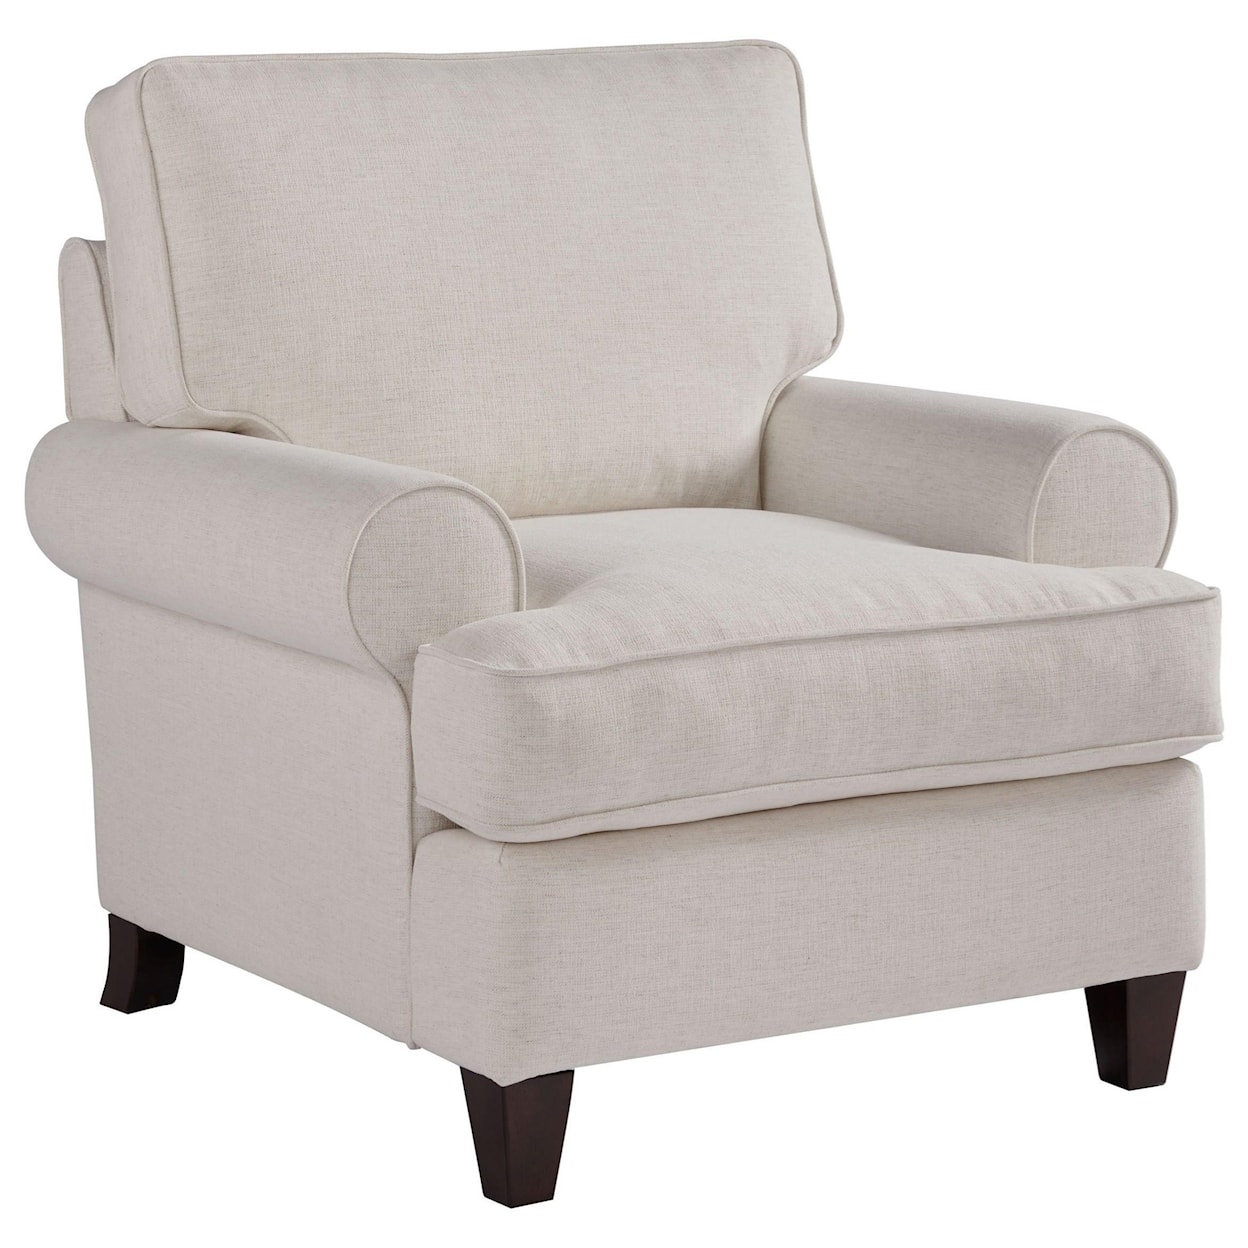 Universal Blakely Chair